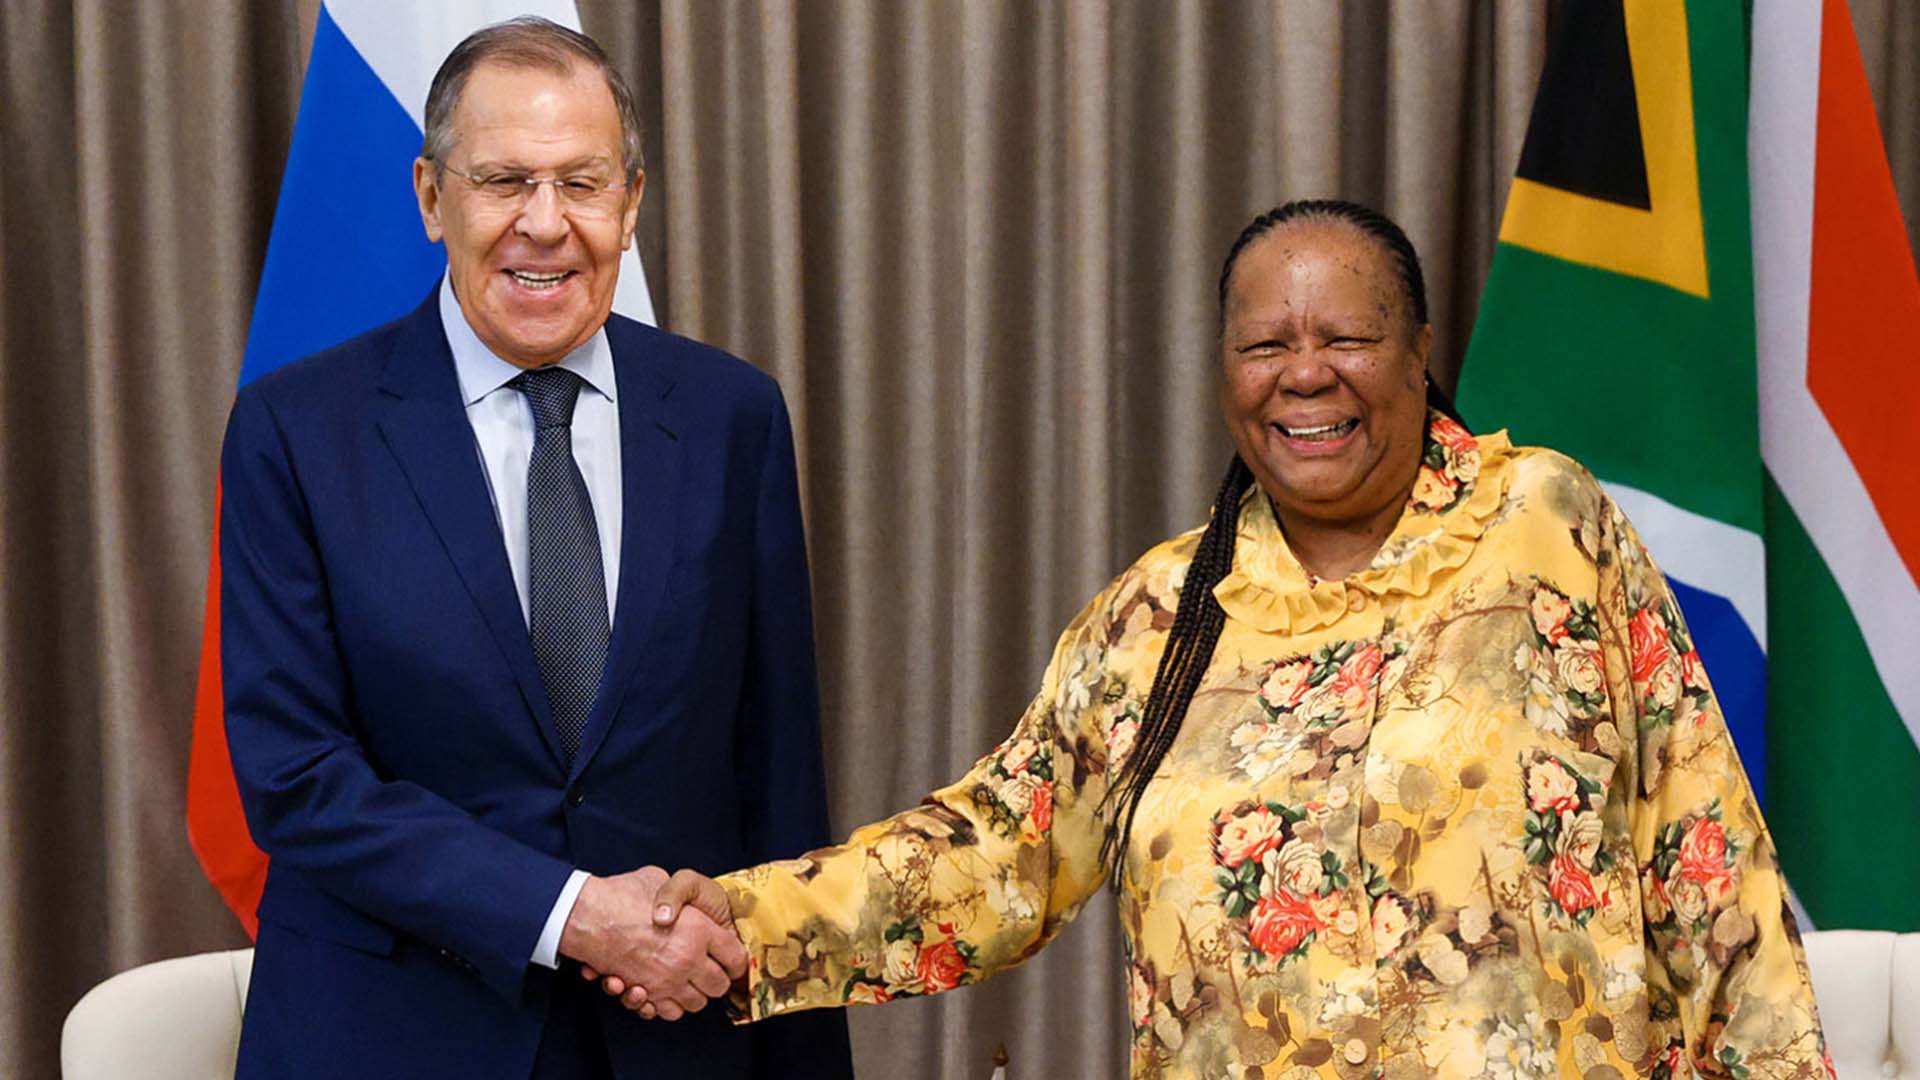 South Africa's Complex Ties with Russia